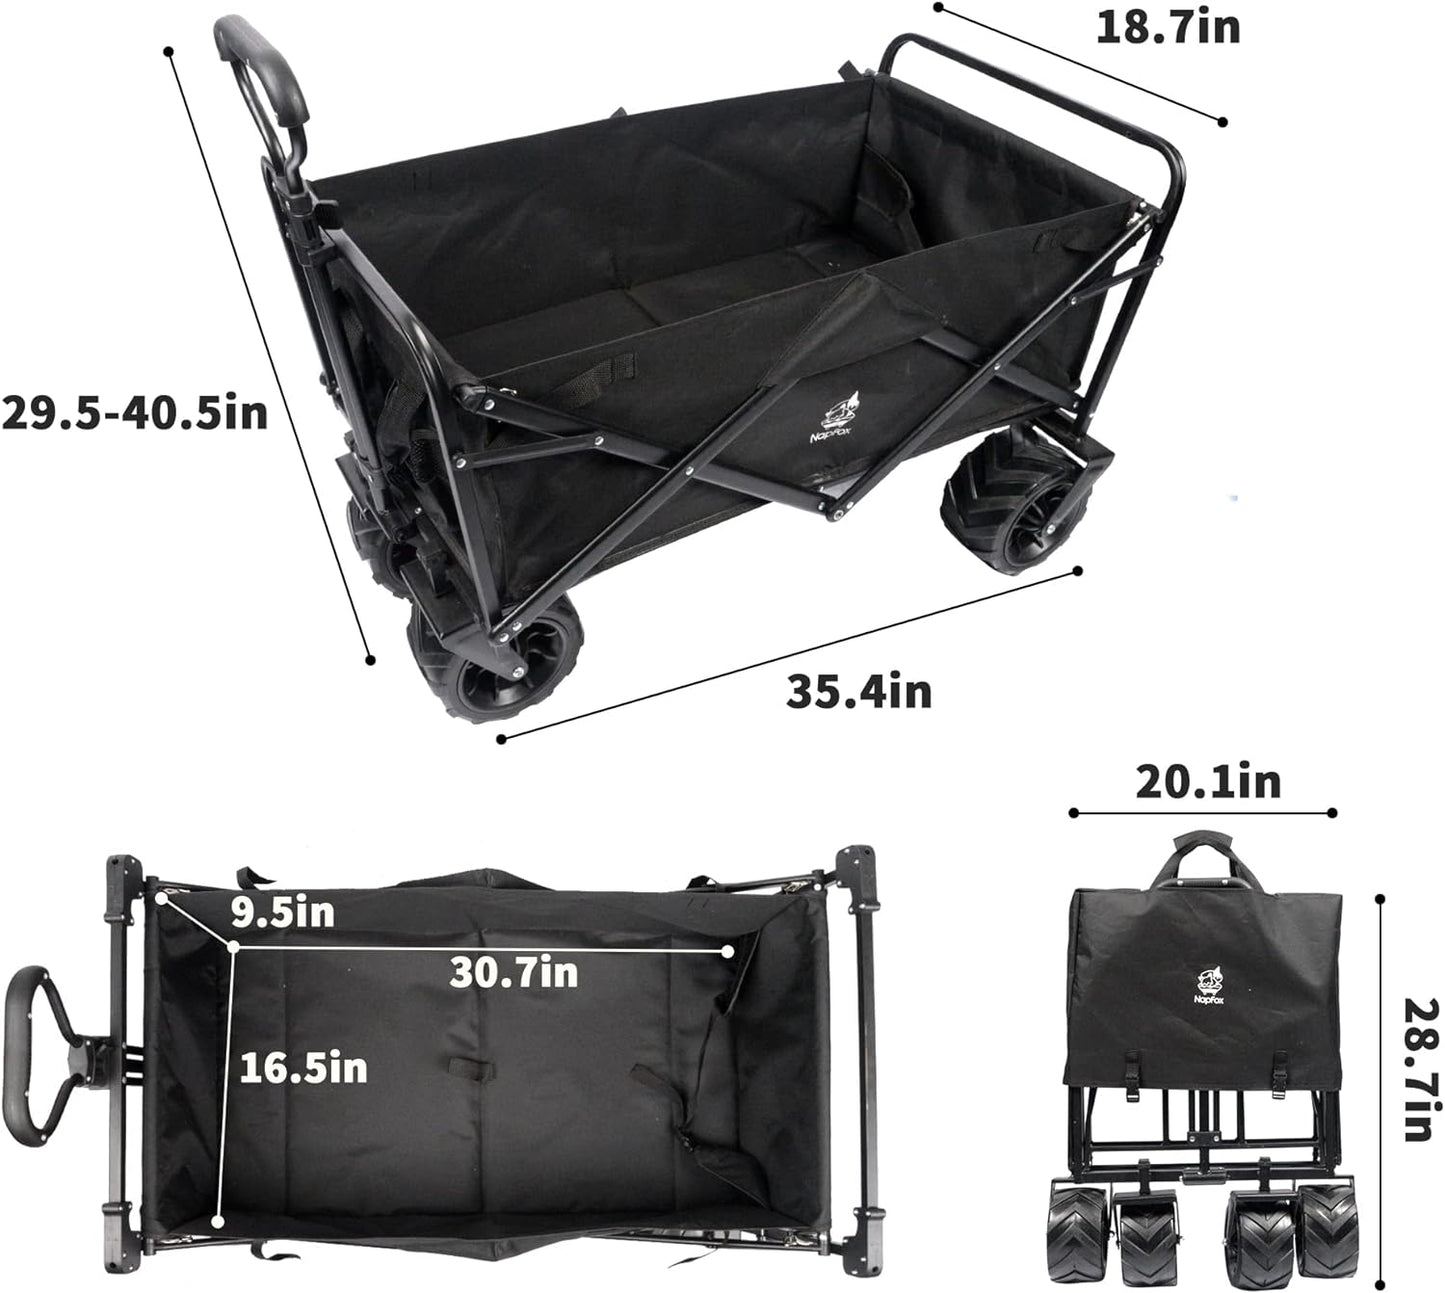 Collapsible Heavy Duty Beach Wagon Cart Outdoor Folding Utility Camping Garden Beach Cart with Universal Wheels Adjustable Handle Shopping (Black)